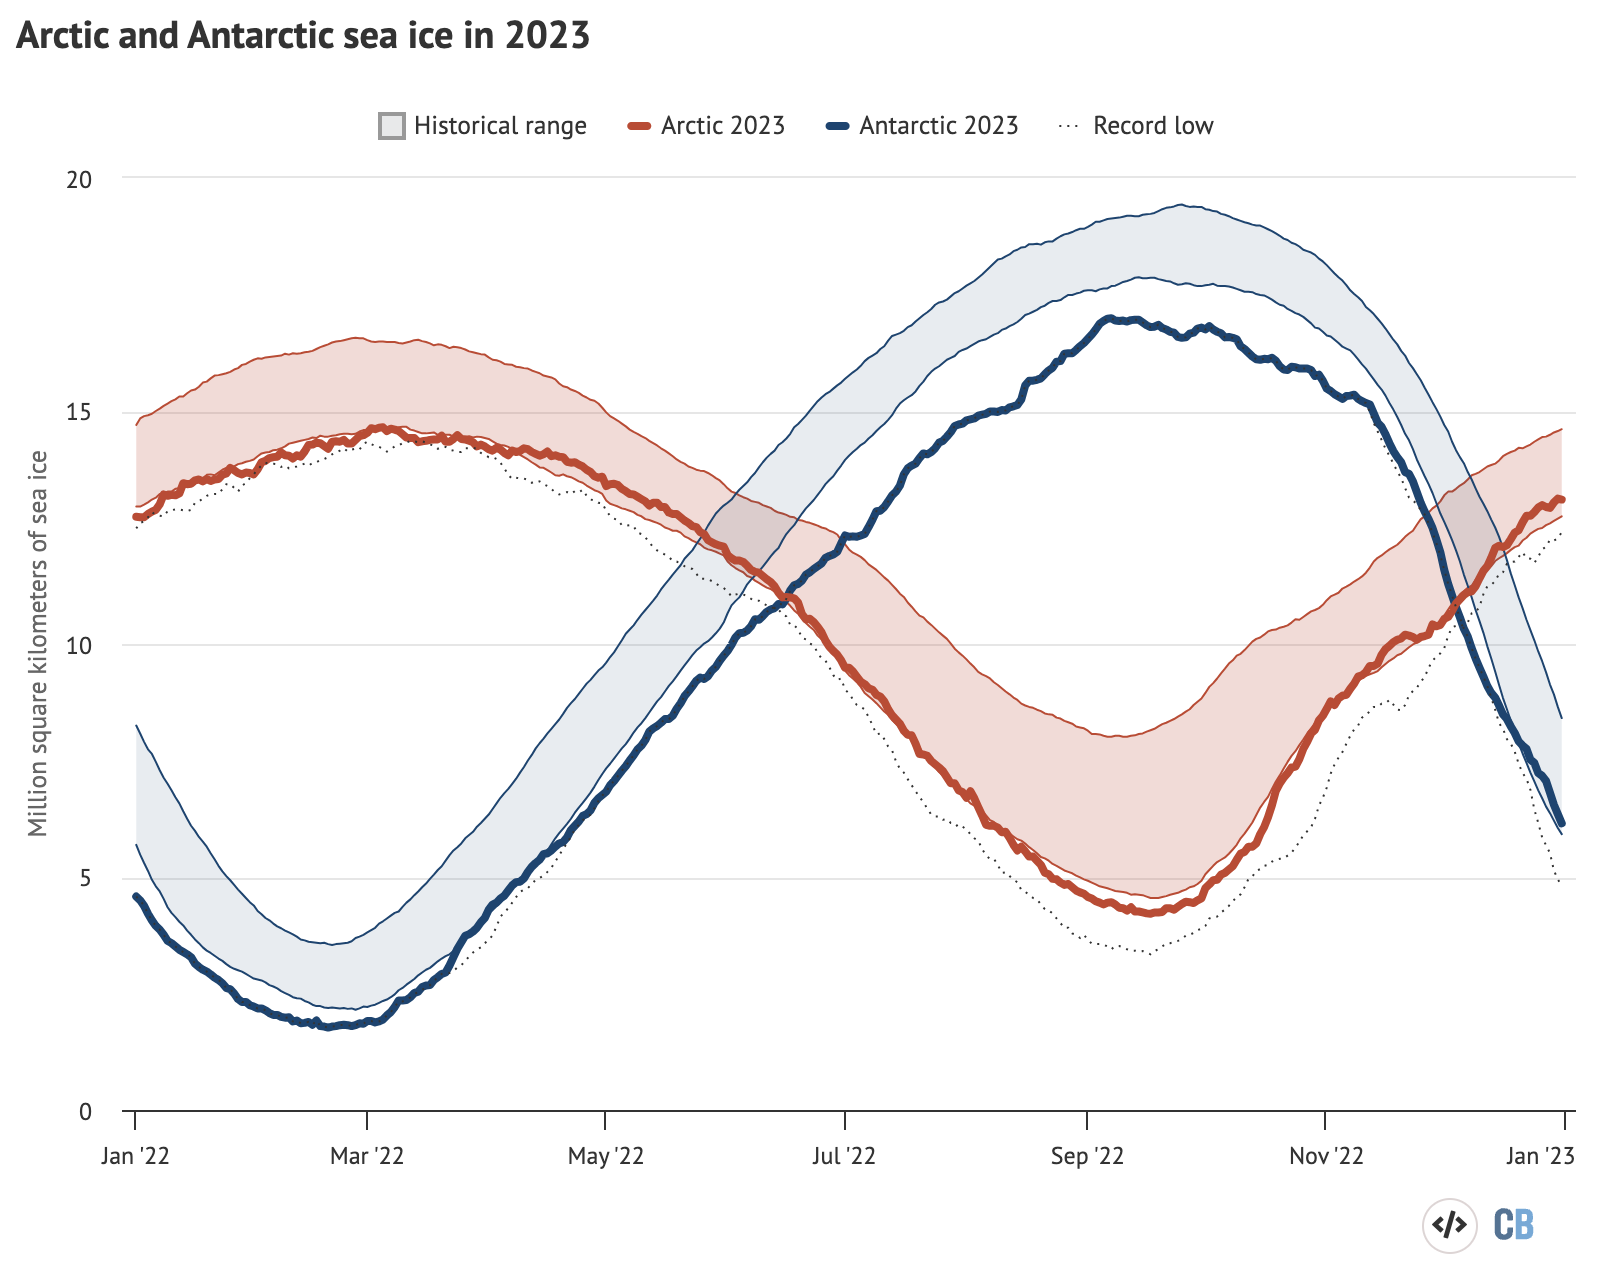 Arctic and Antarctic daily sea ice extent from the US National Snow and Ice Data Center. The bold lines show daily 2023 values, the shaded area indicates the two standard deviation range in historical values between 1979 and 2010. The dotted black lines show the record lows for each pole. Chart by Carbon Brief.